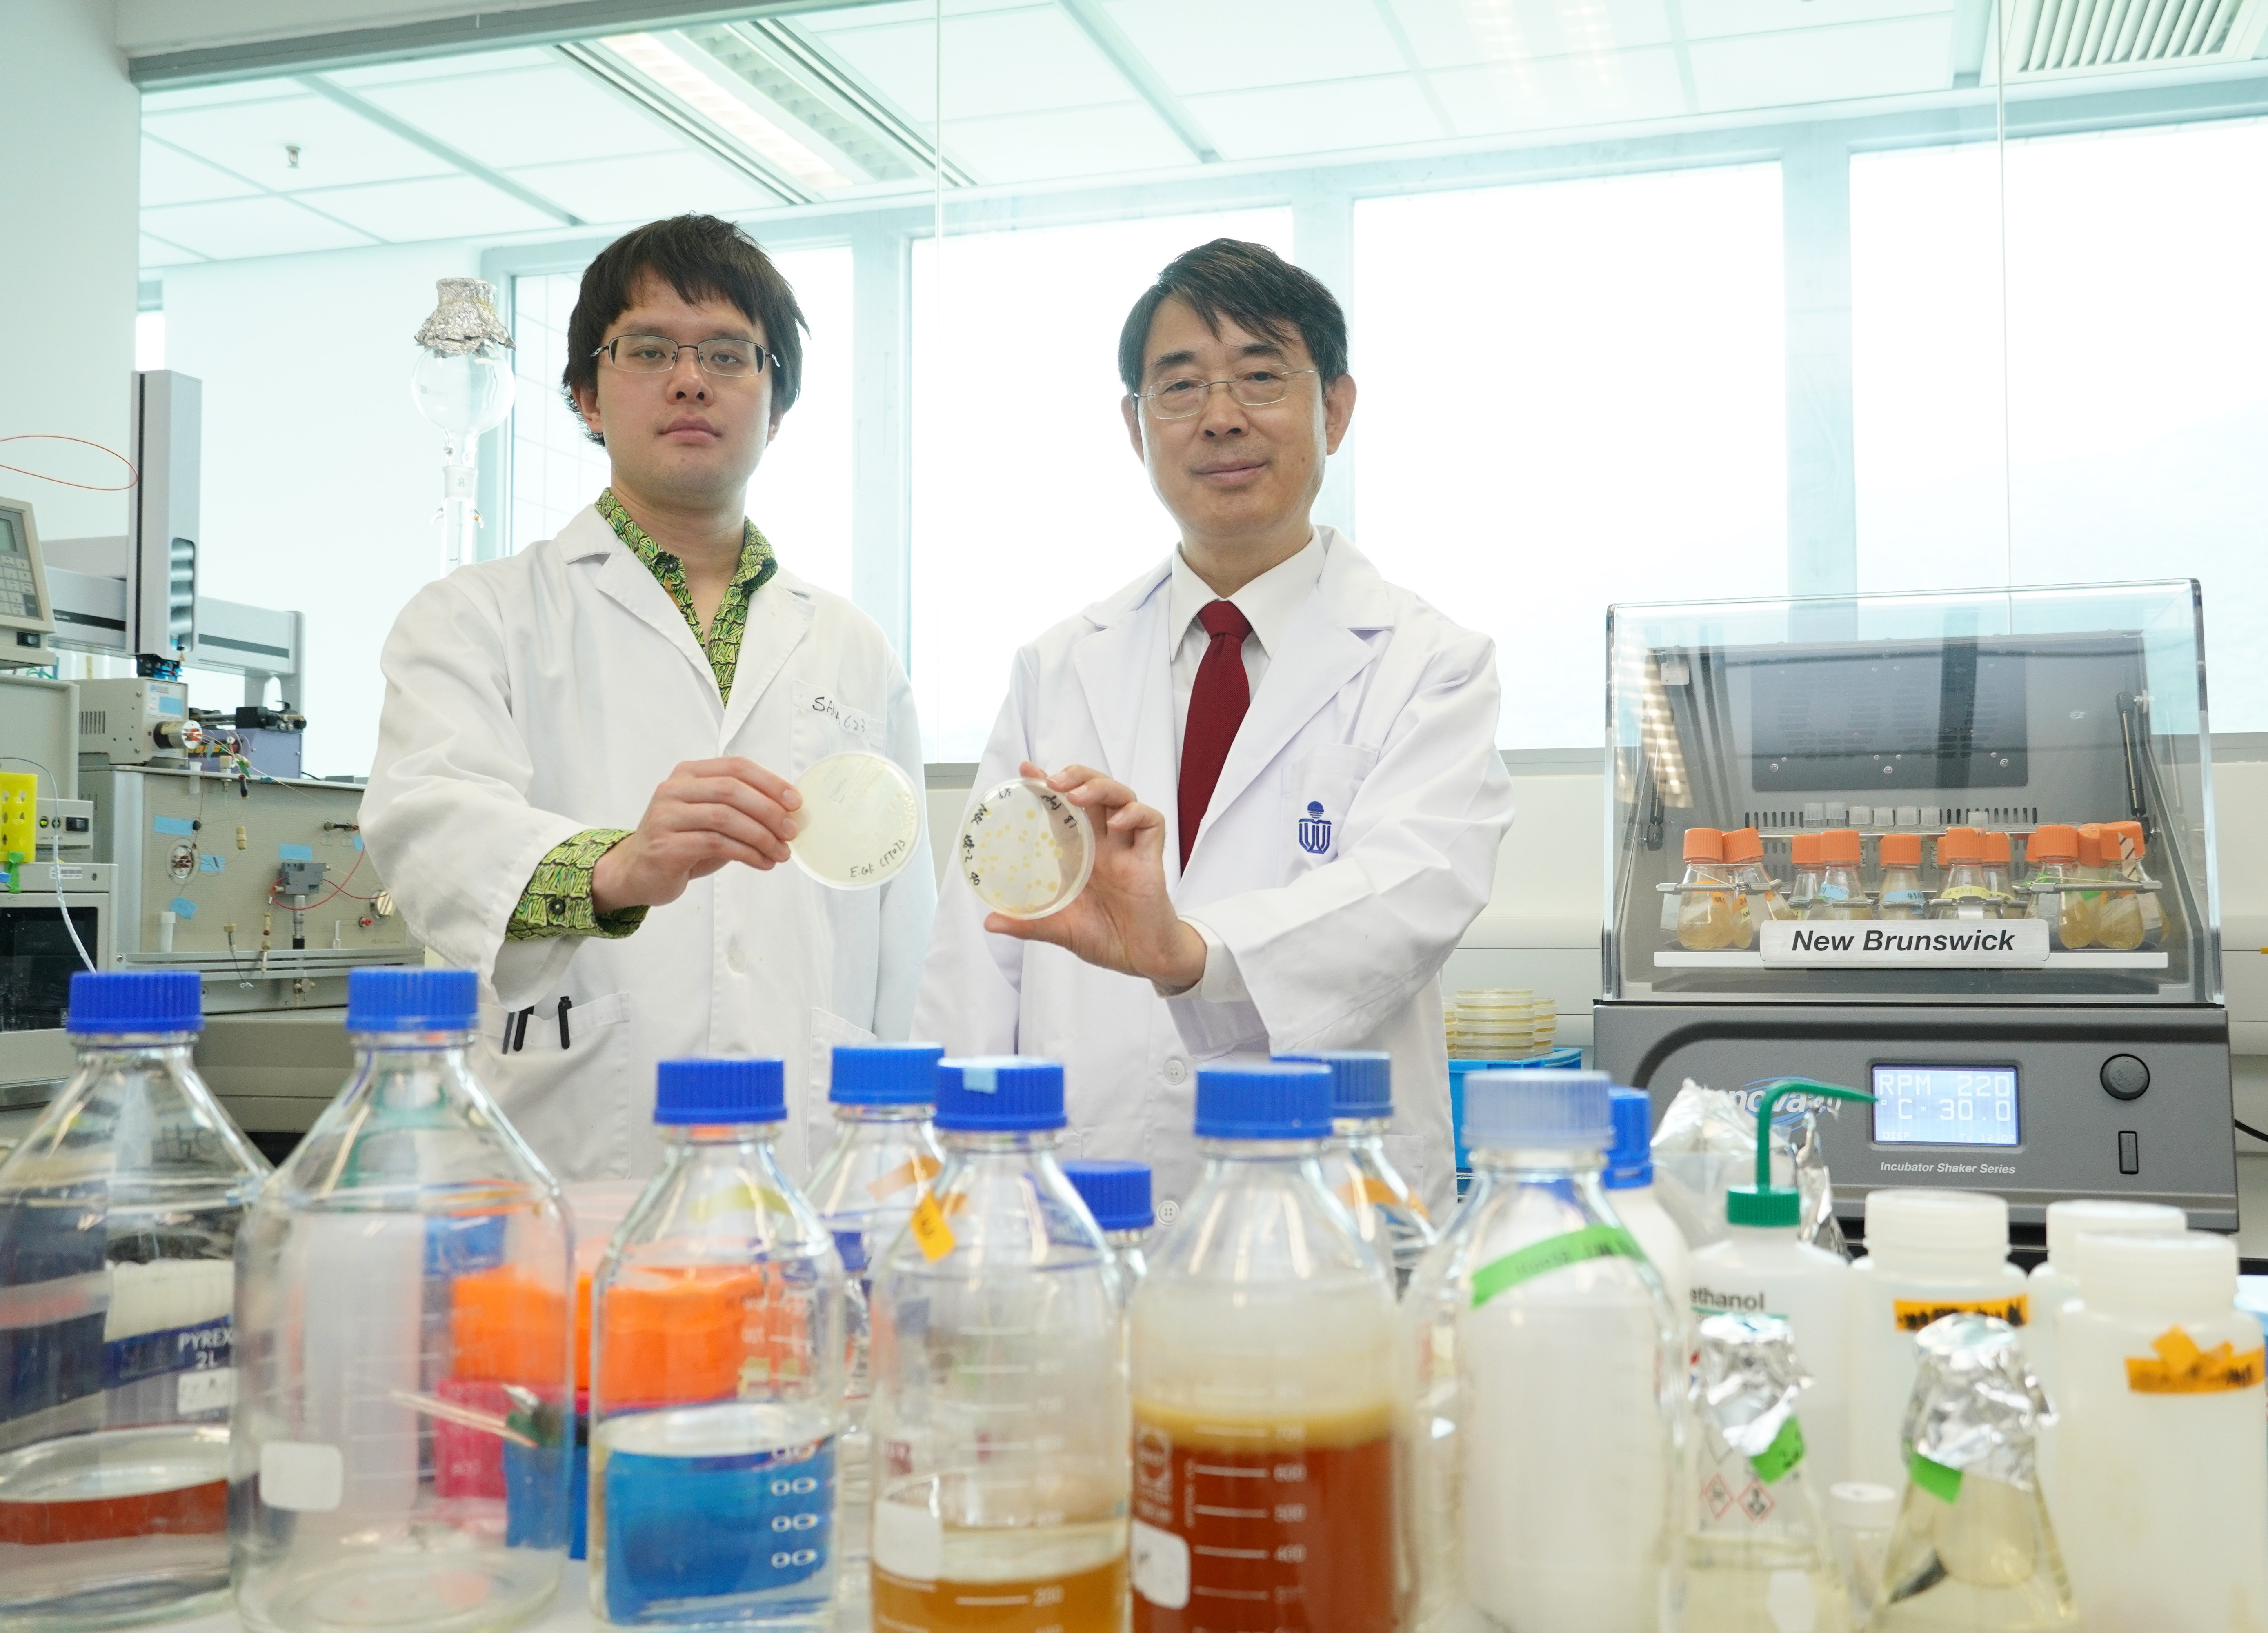  Prof. Qian Peiyuan (right) and LI Zhongrui (left) from his research team have been studying the microbe-animal interactions. 